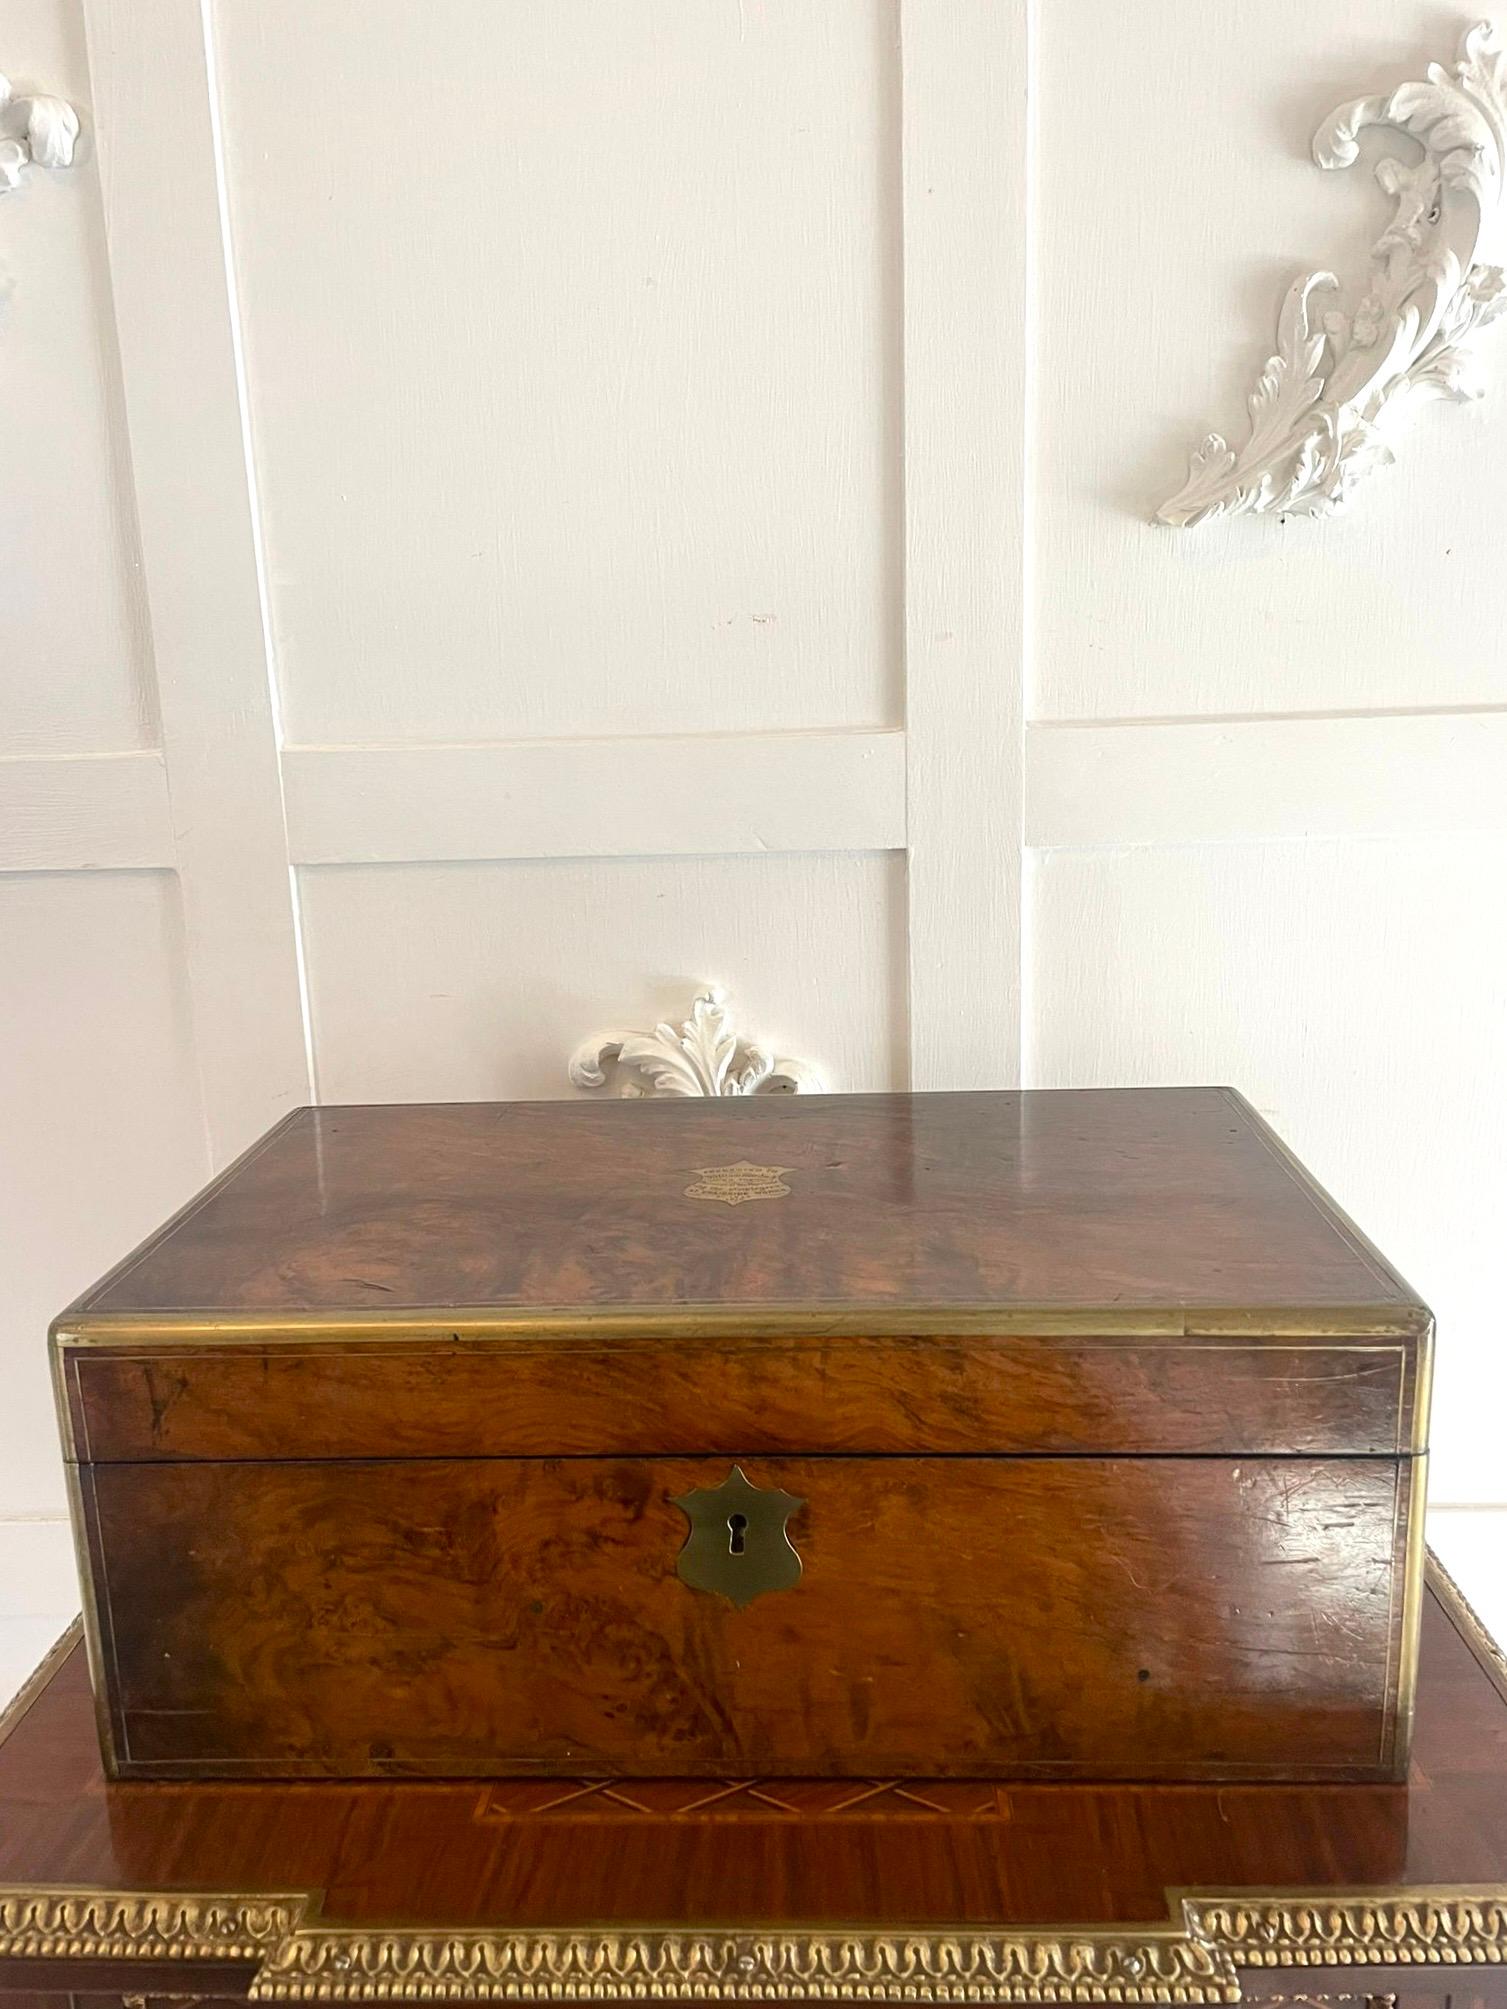 Superb quality antique Victorian burr walnut brass bound writing box having brass bounded corners and edges around a superior quality burr walnut writing box opening to reveal a writing surface inkwells, pen tray and two lift up lids opening to